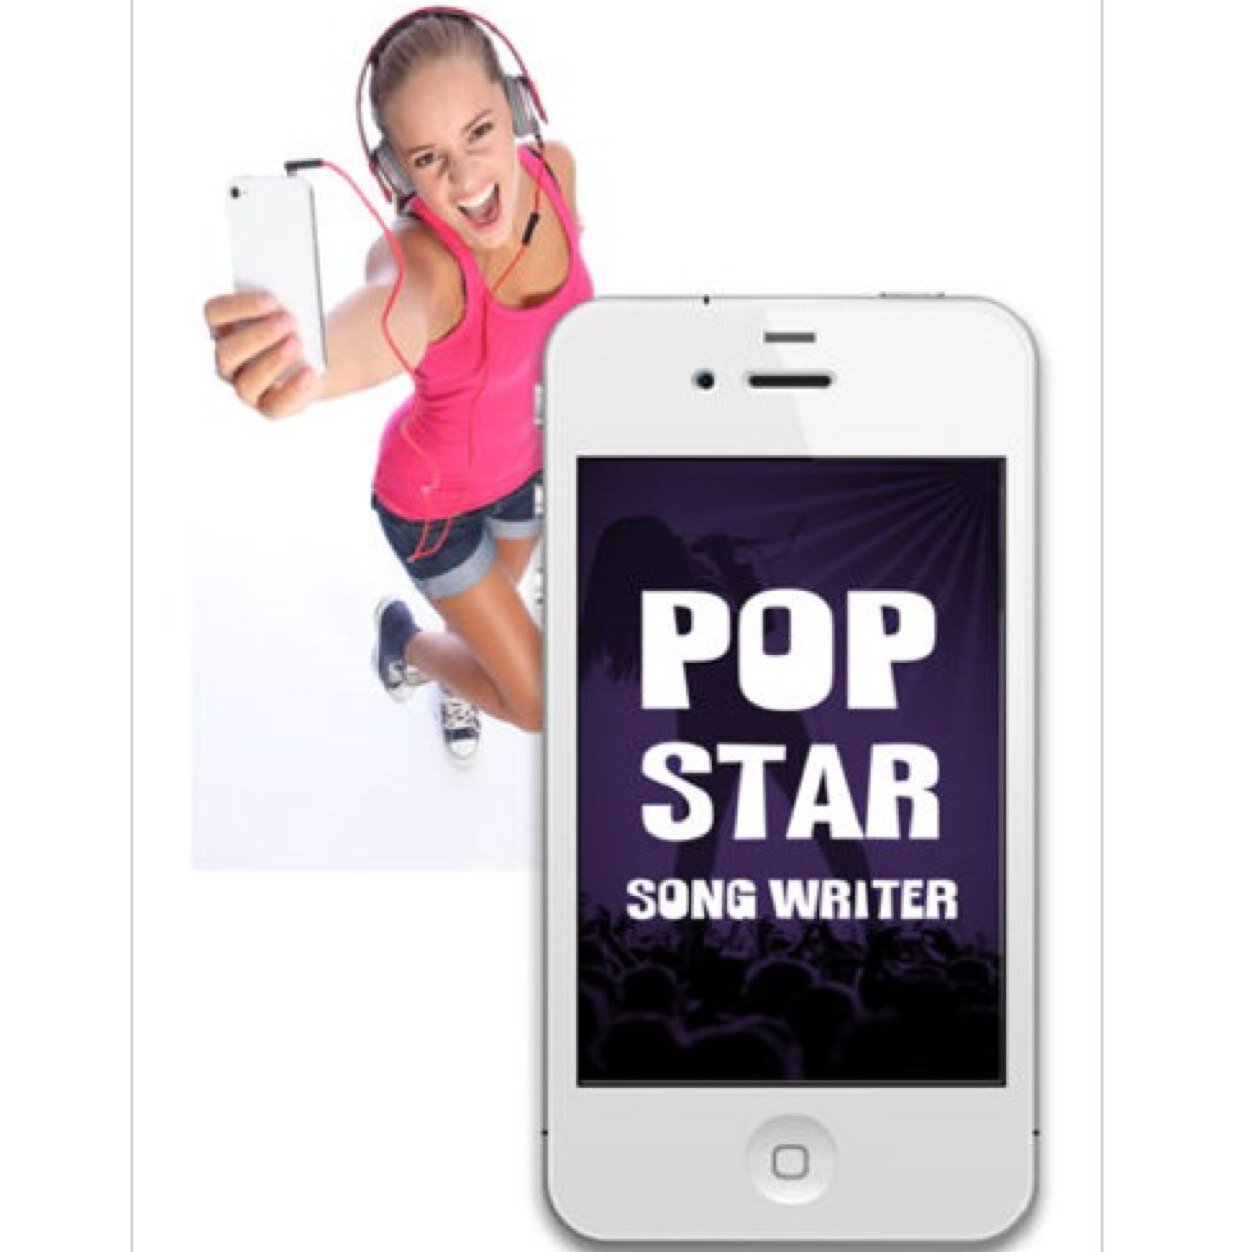 Got a great singing voice? Want to be a Pop Star? Now you can! Download 'Pop Star Song Writer' from iTunes Appstore.